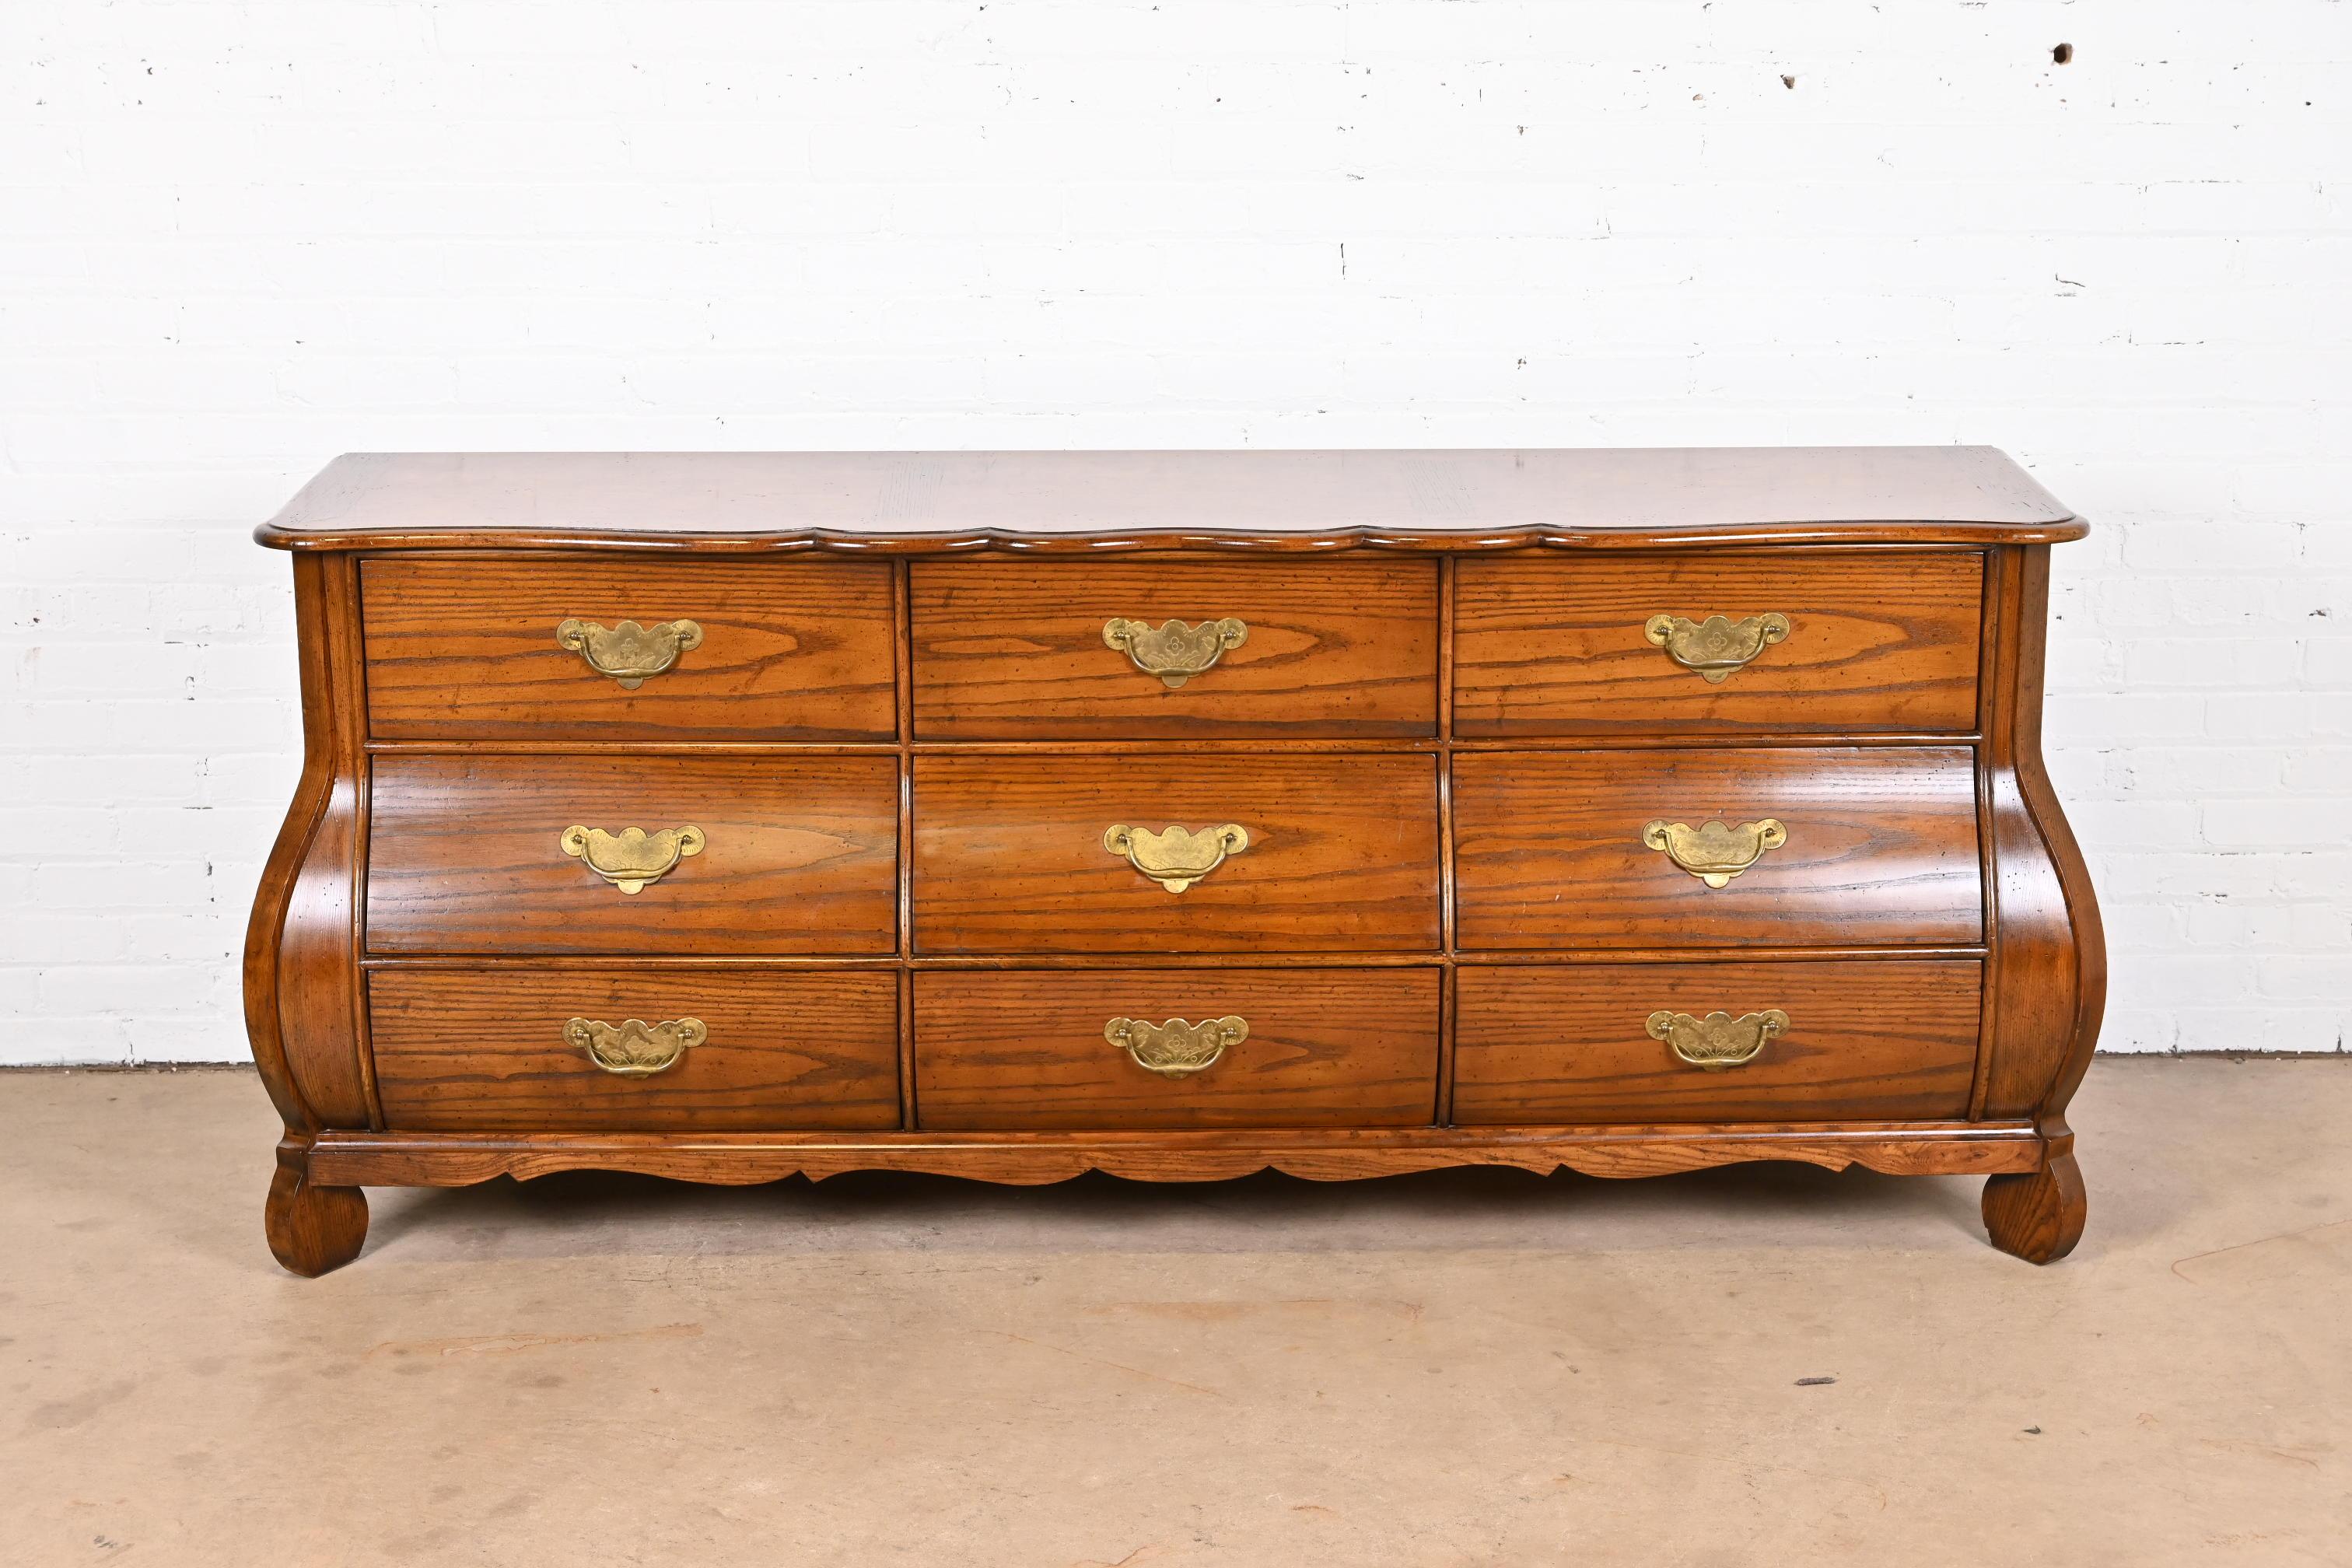 A gorgeous French Provincial Louis XV style bombay form triple dresser or credenza

By Baker Furniture, 